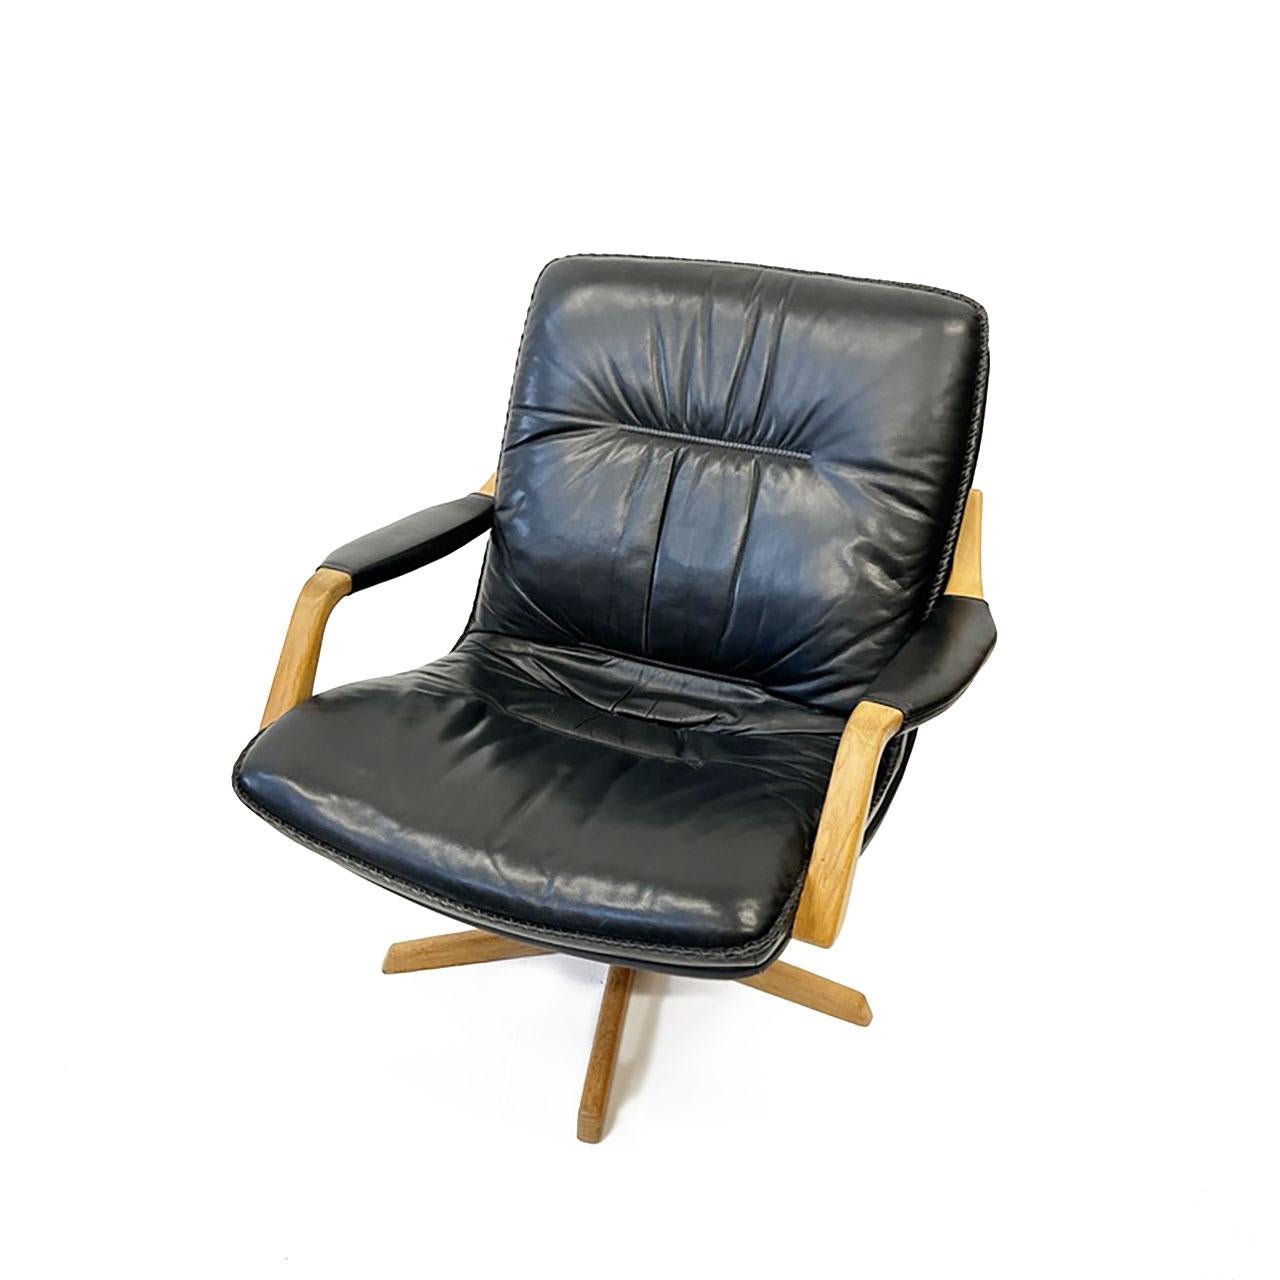 Produced in Denmark by Berg Furniture during the 1970s. Uholstered in whipstitch-trimmed black leather with natural and beautiful patina. The base and the armrests are made from oak. Quality, design and comfort are a main tasks of Berg Furniture,